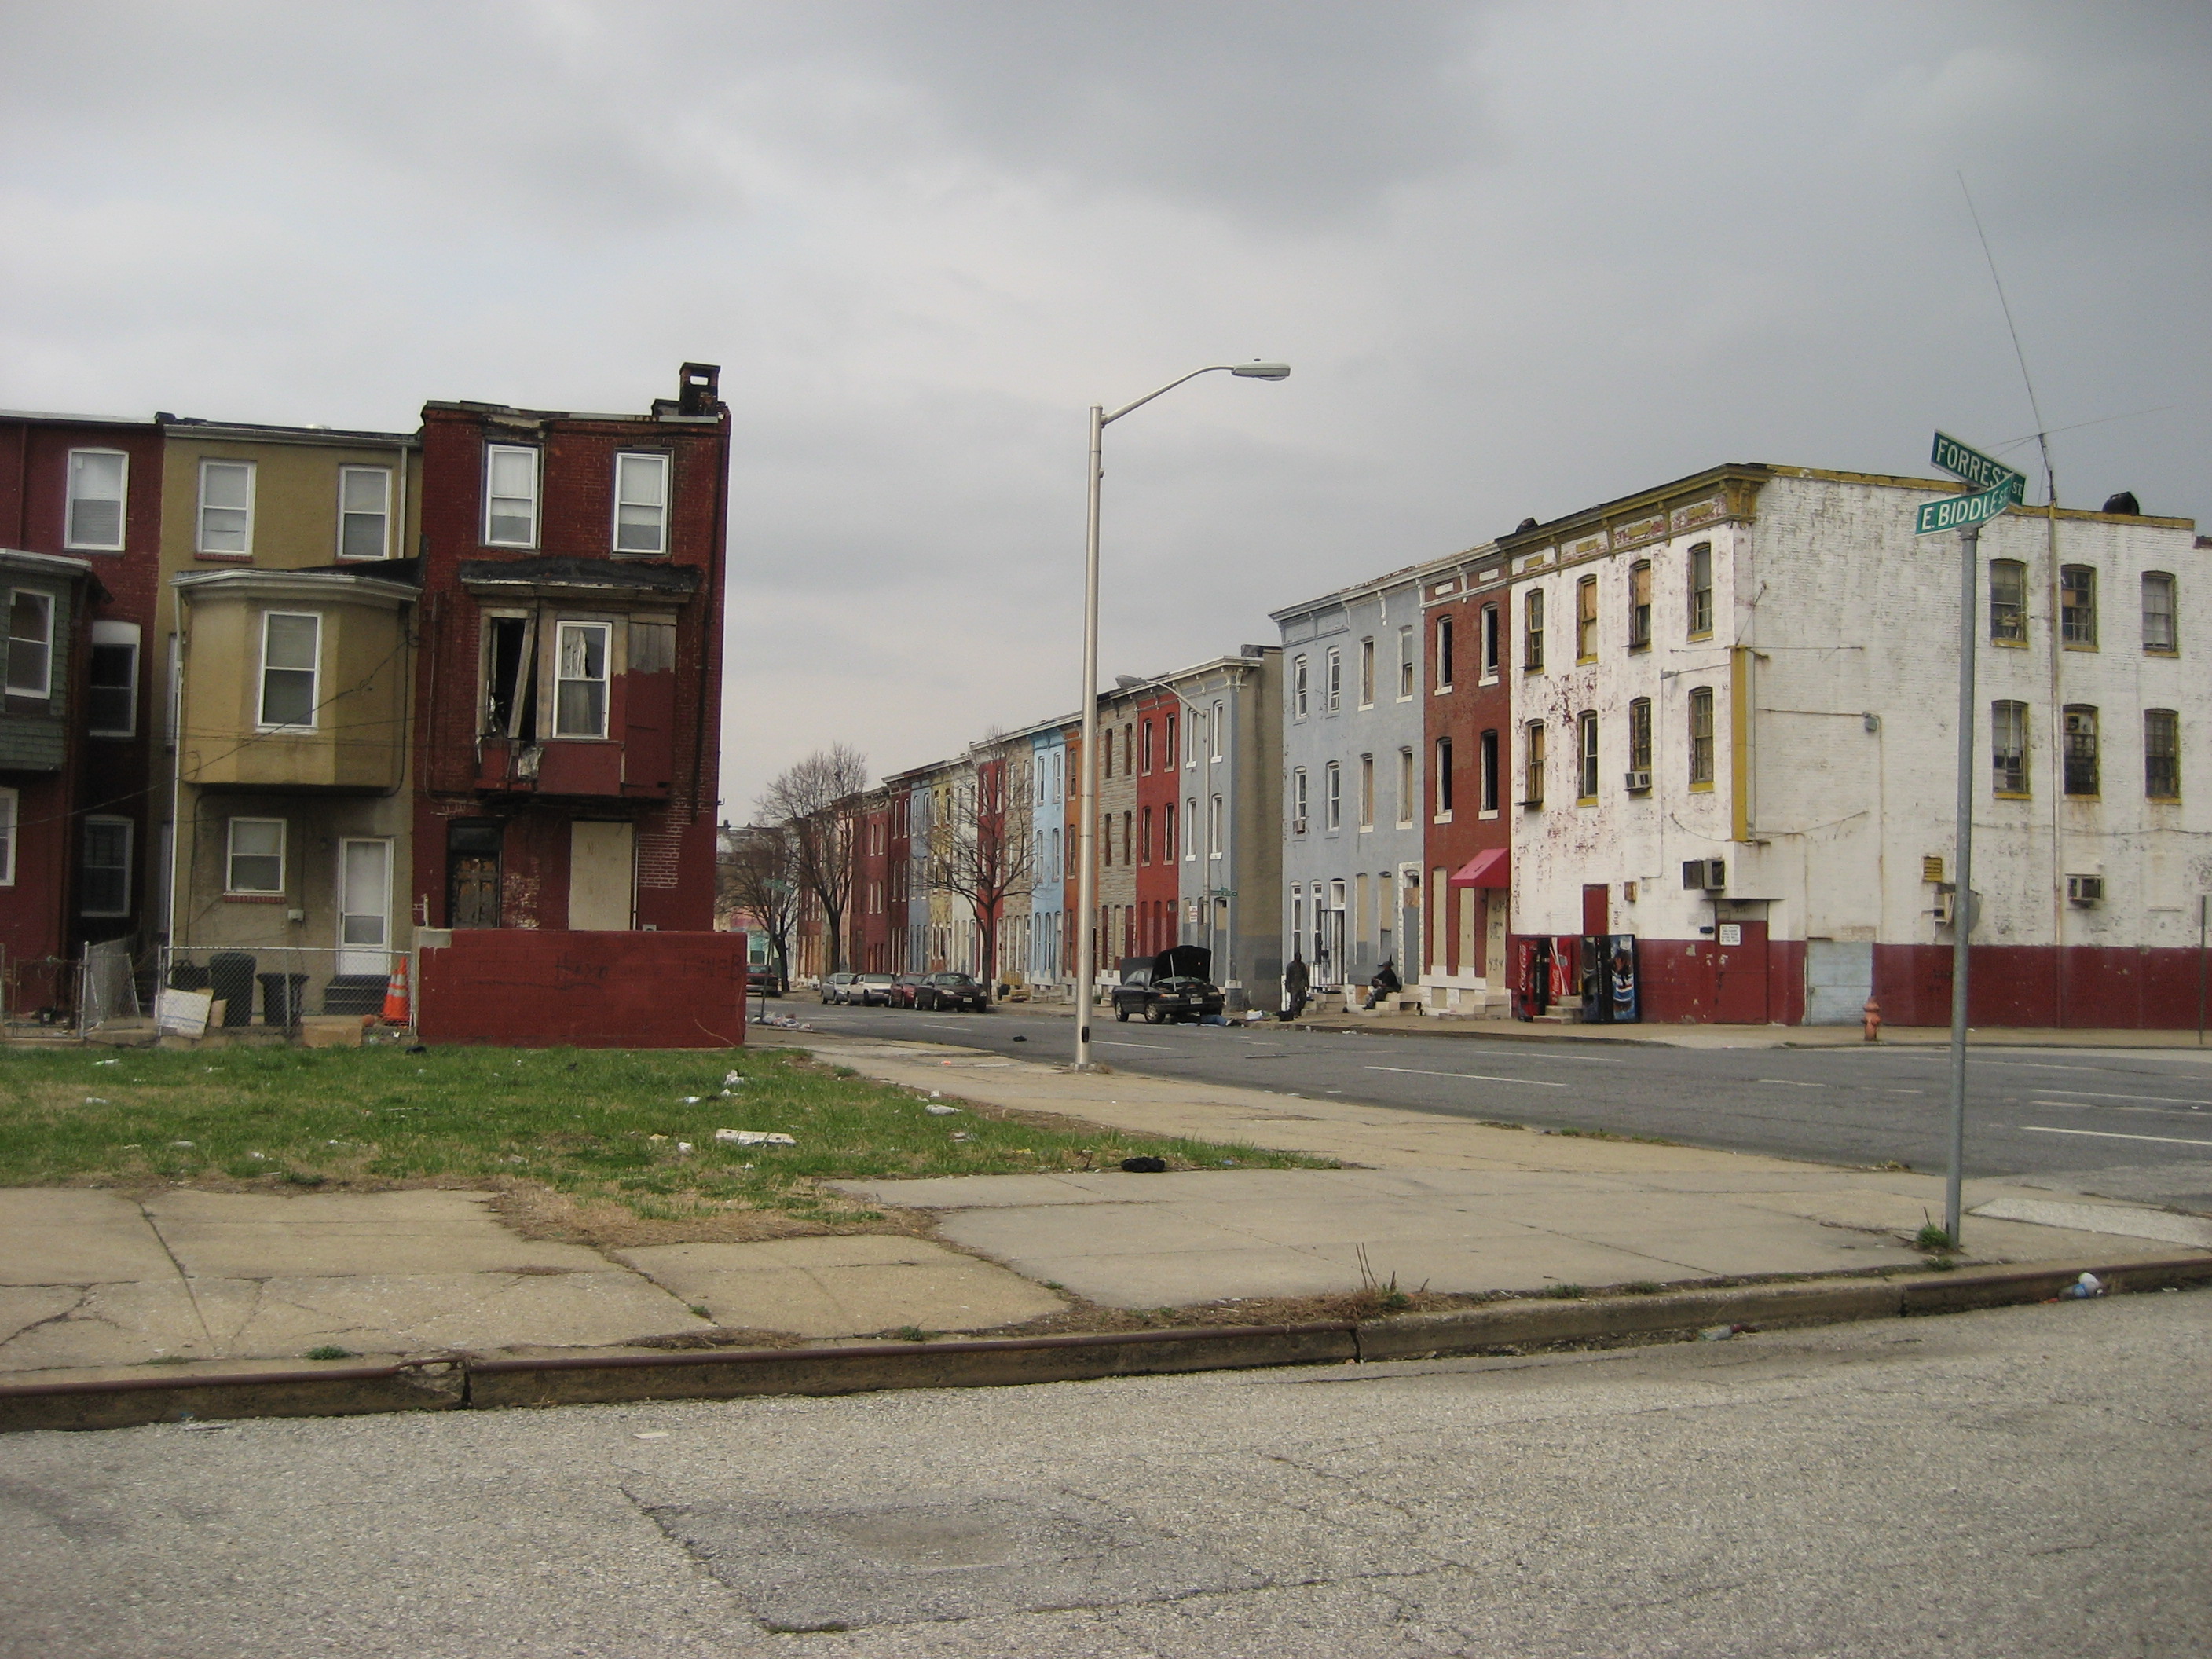 The Last Word On Nothing Mapping Baltimore’s Addiction